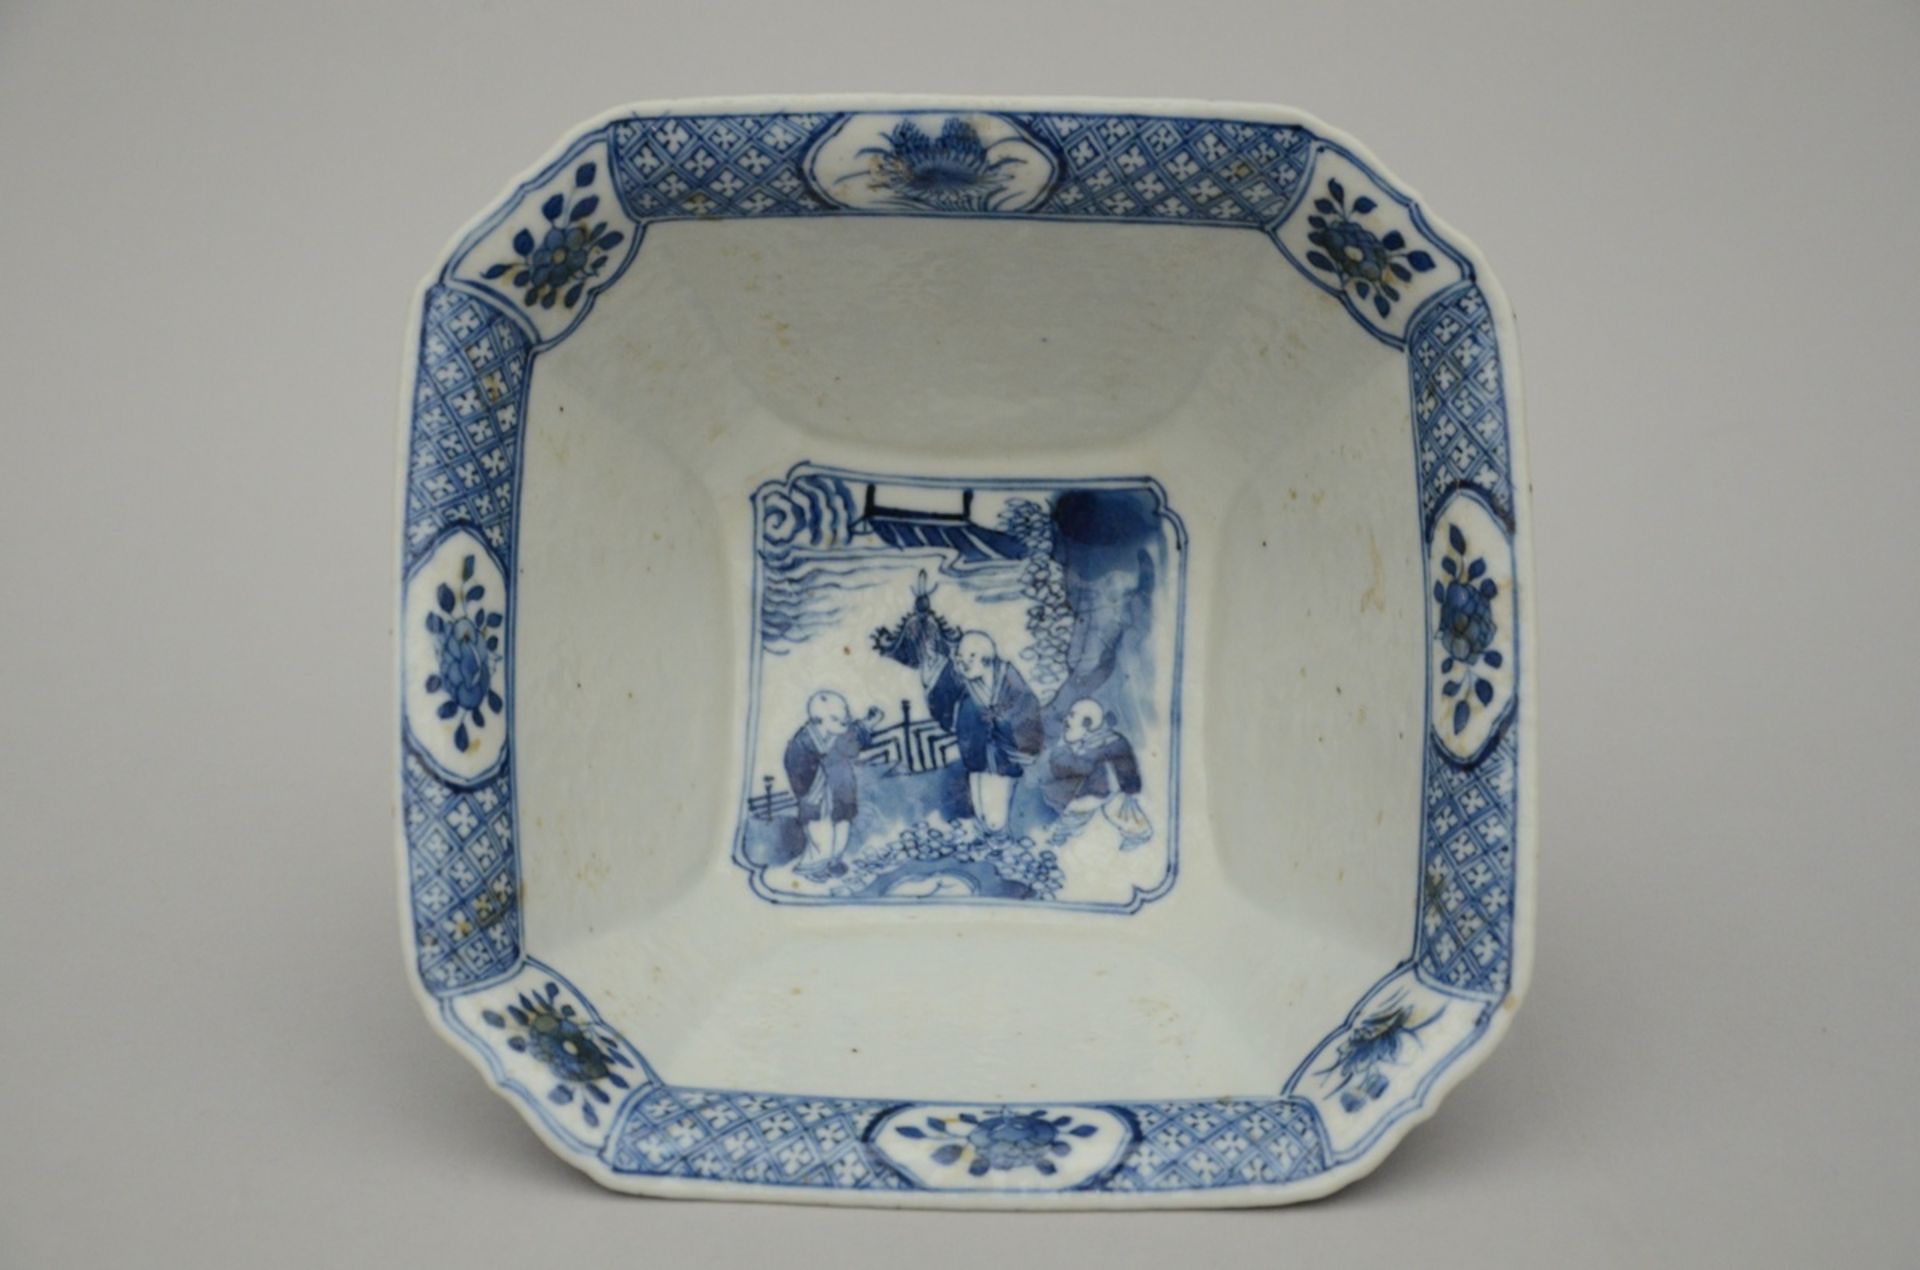 Chinese octagonal bowl in blue and white porcelain 'romantic scenes' 19th century (11.5x21x20.5cm) - Image 4 of 5